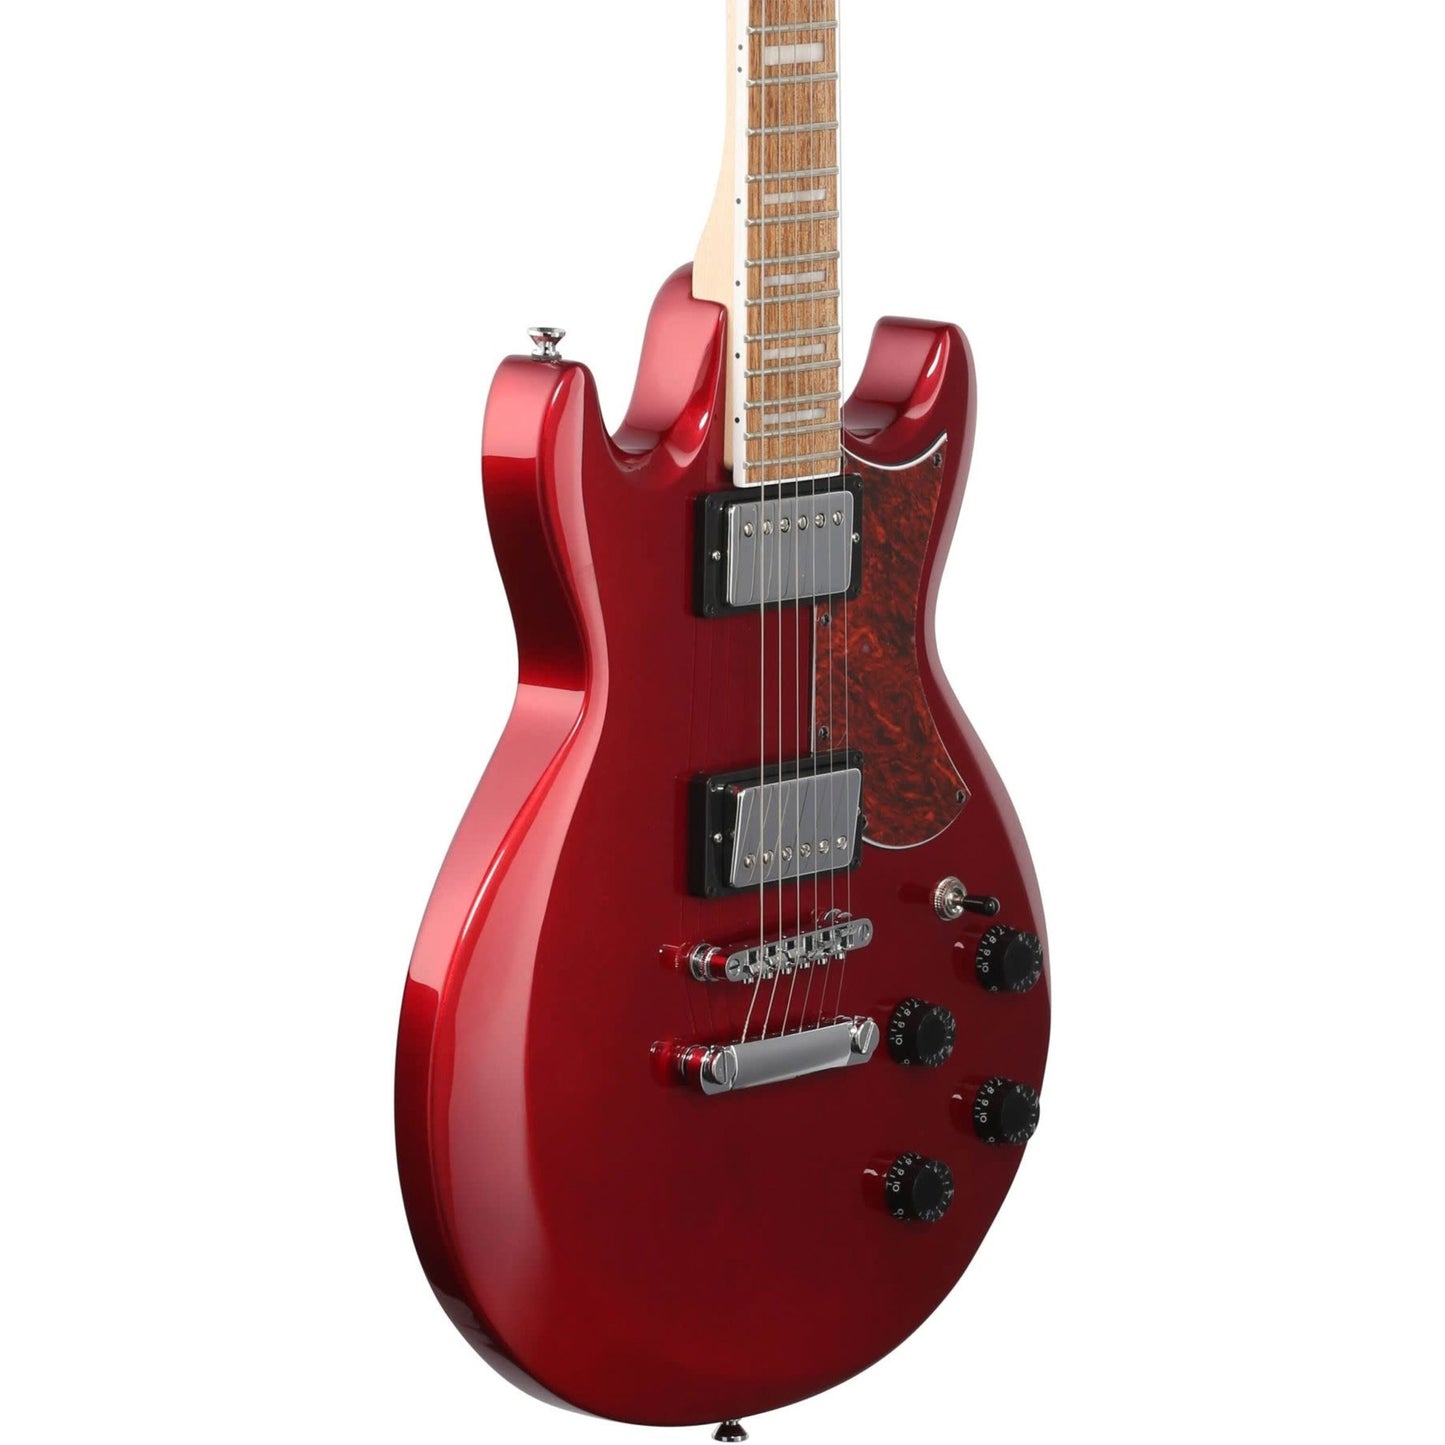 Ibanez AX120 Electric Guitar in Candy Apple Red